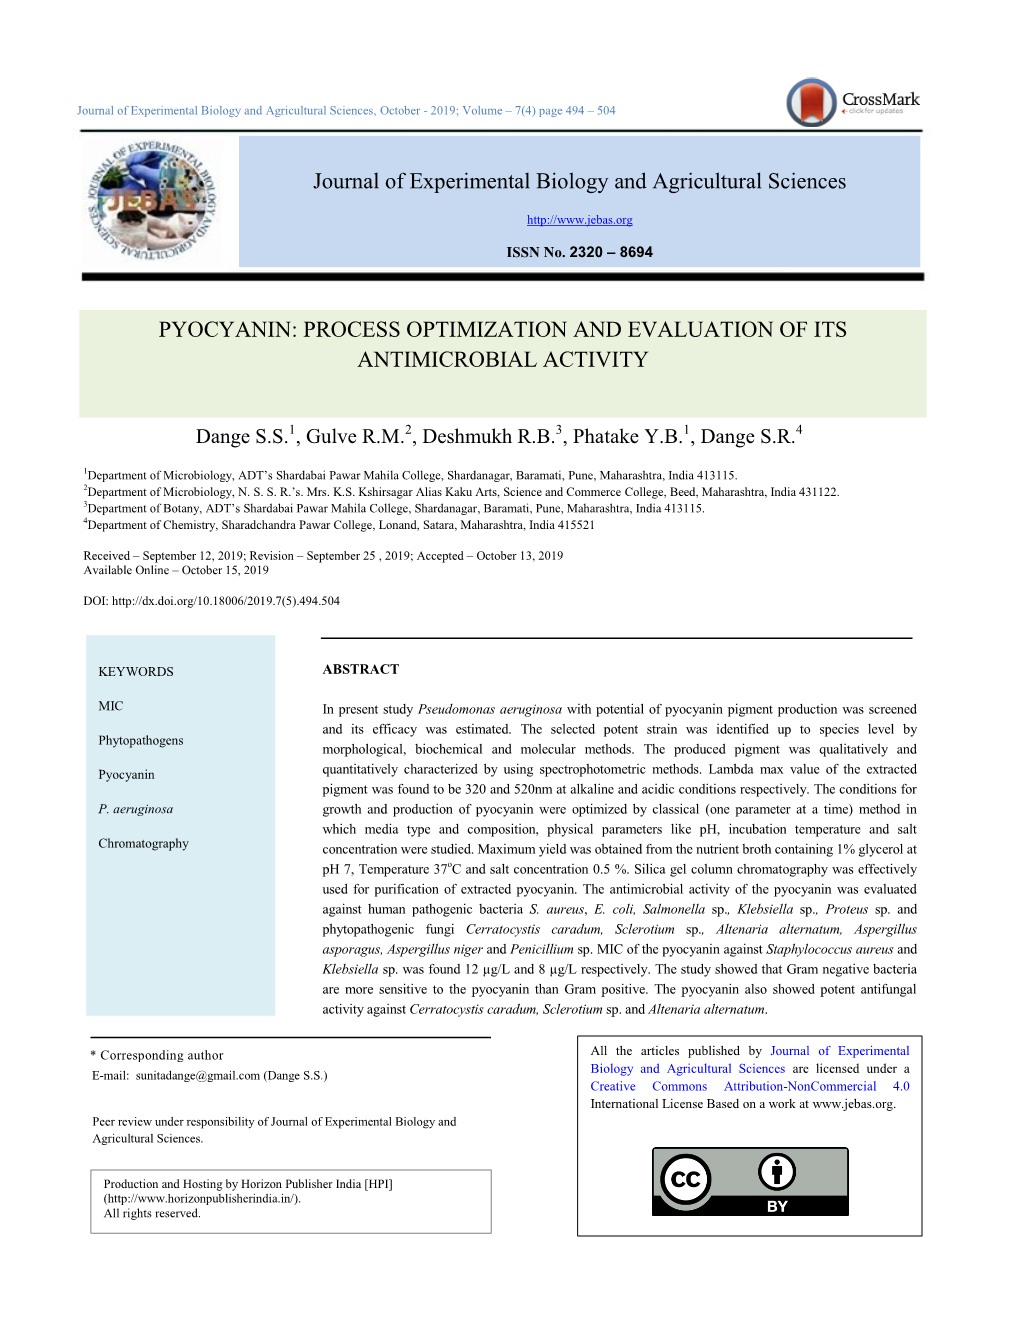 Journal of Experimental Biology and Agricultural Sciences PYOCYANIN